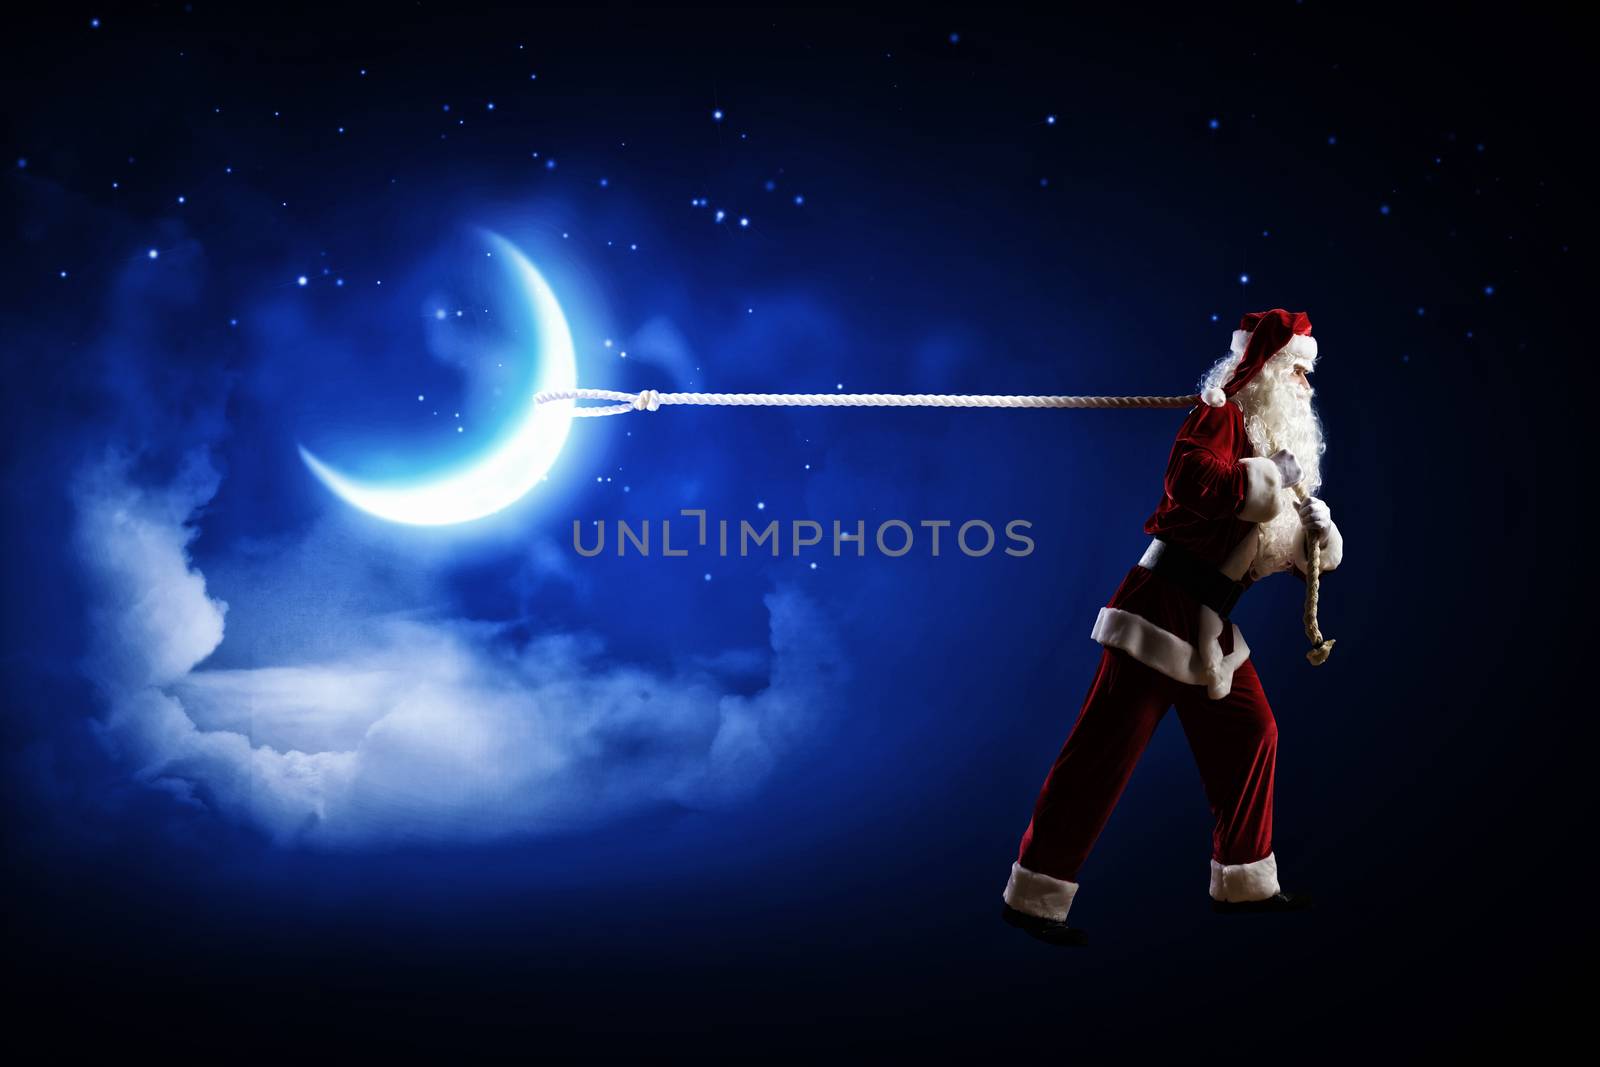 Image of Santa Claus pulling moon with rope